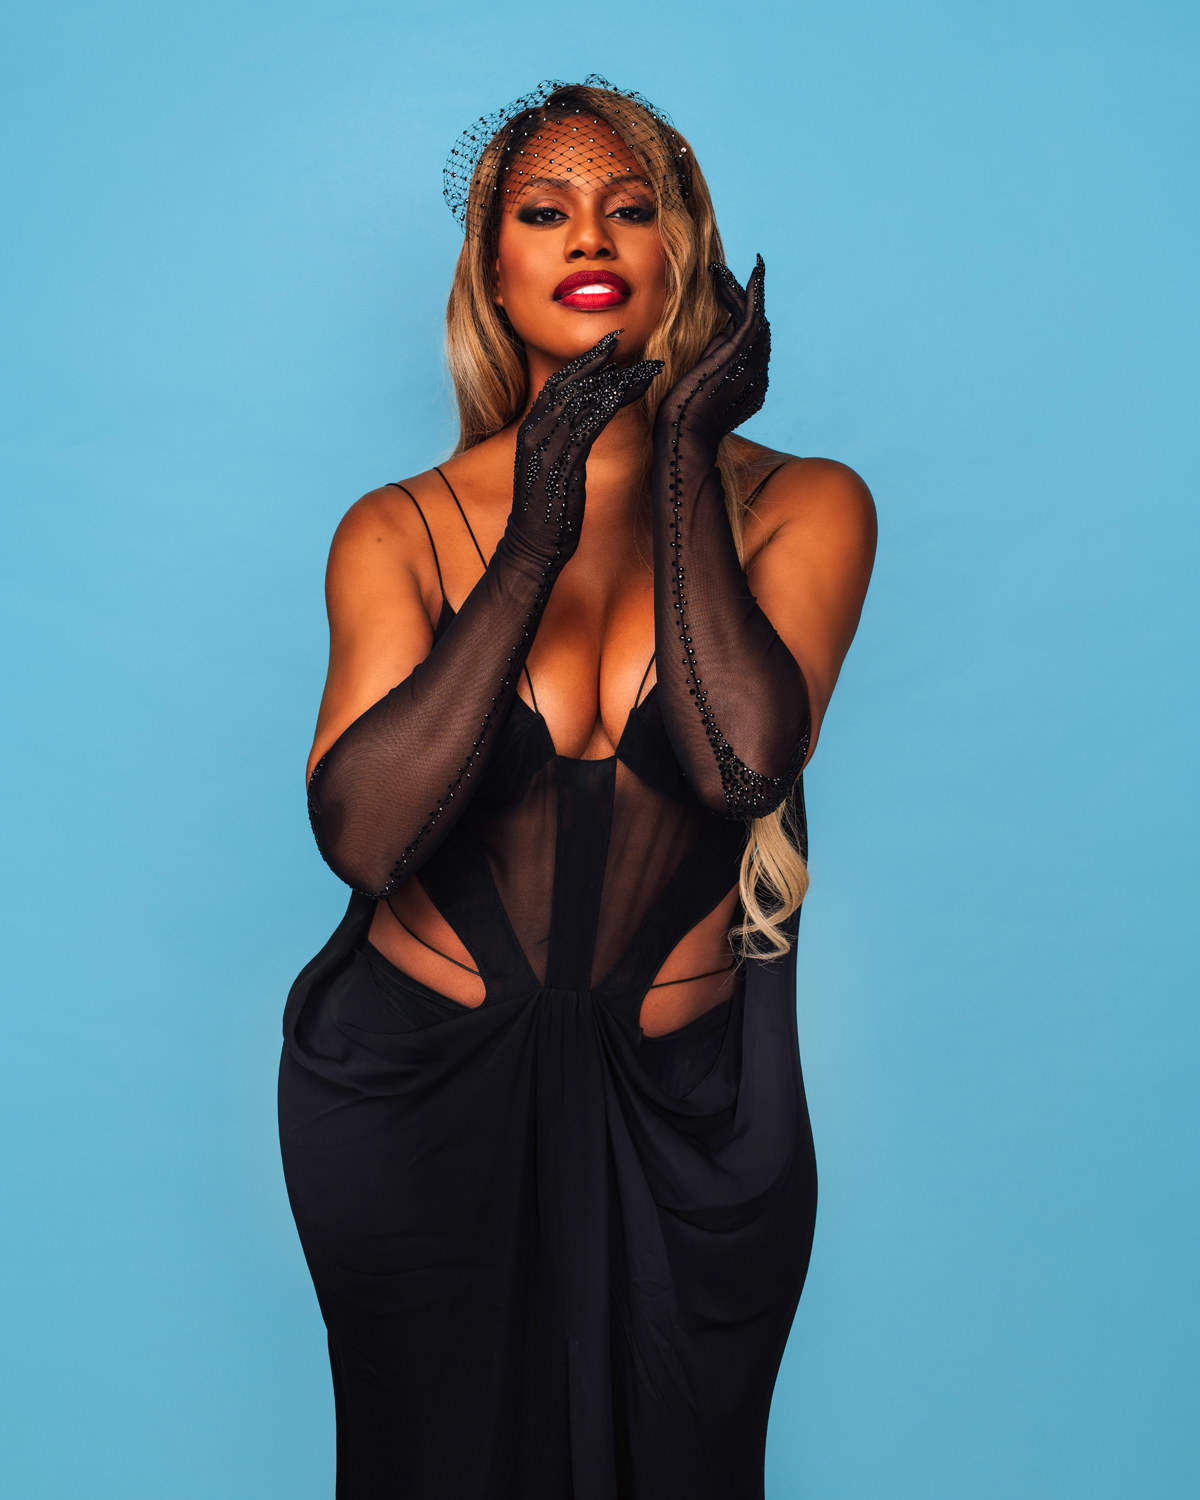 Laverne holds her hands up to her face in a seductive pose as she wears a partially see-through cutout dress